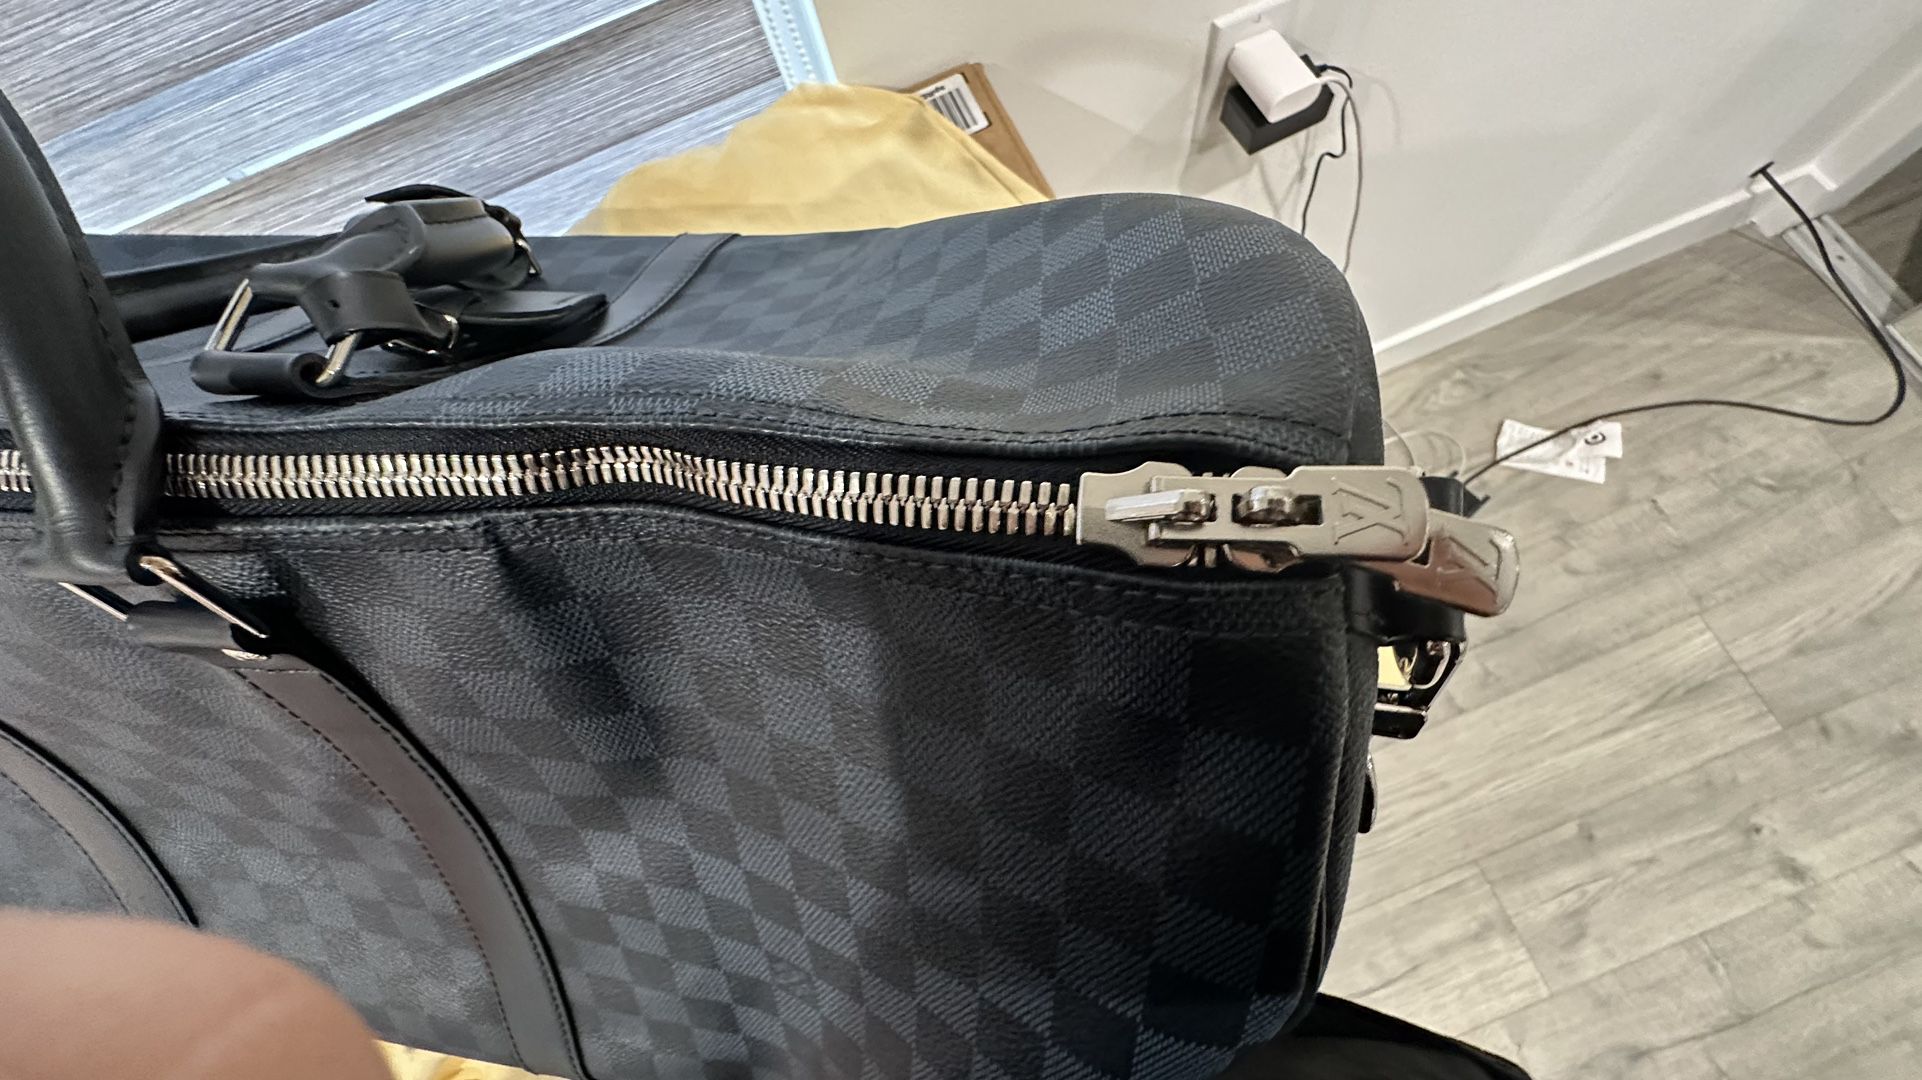 Louis Vuitton Keepall 50 for Sale in Columbia, MD - OfferUp